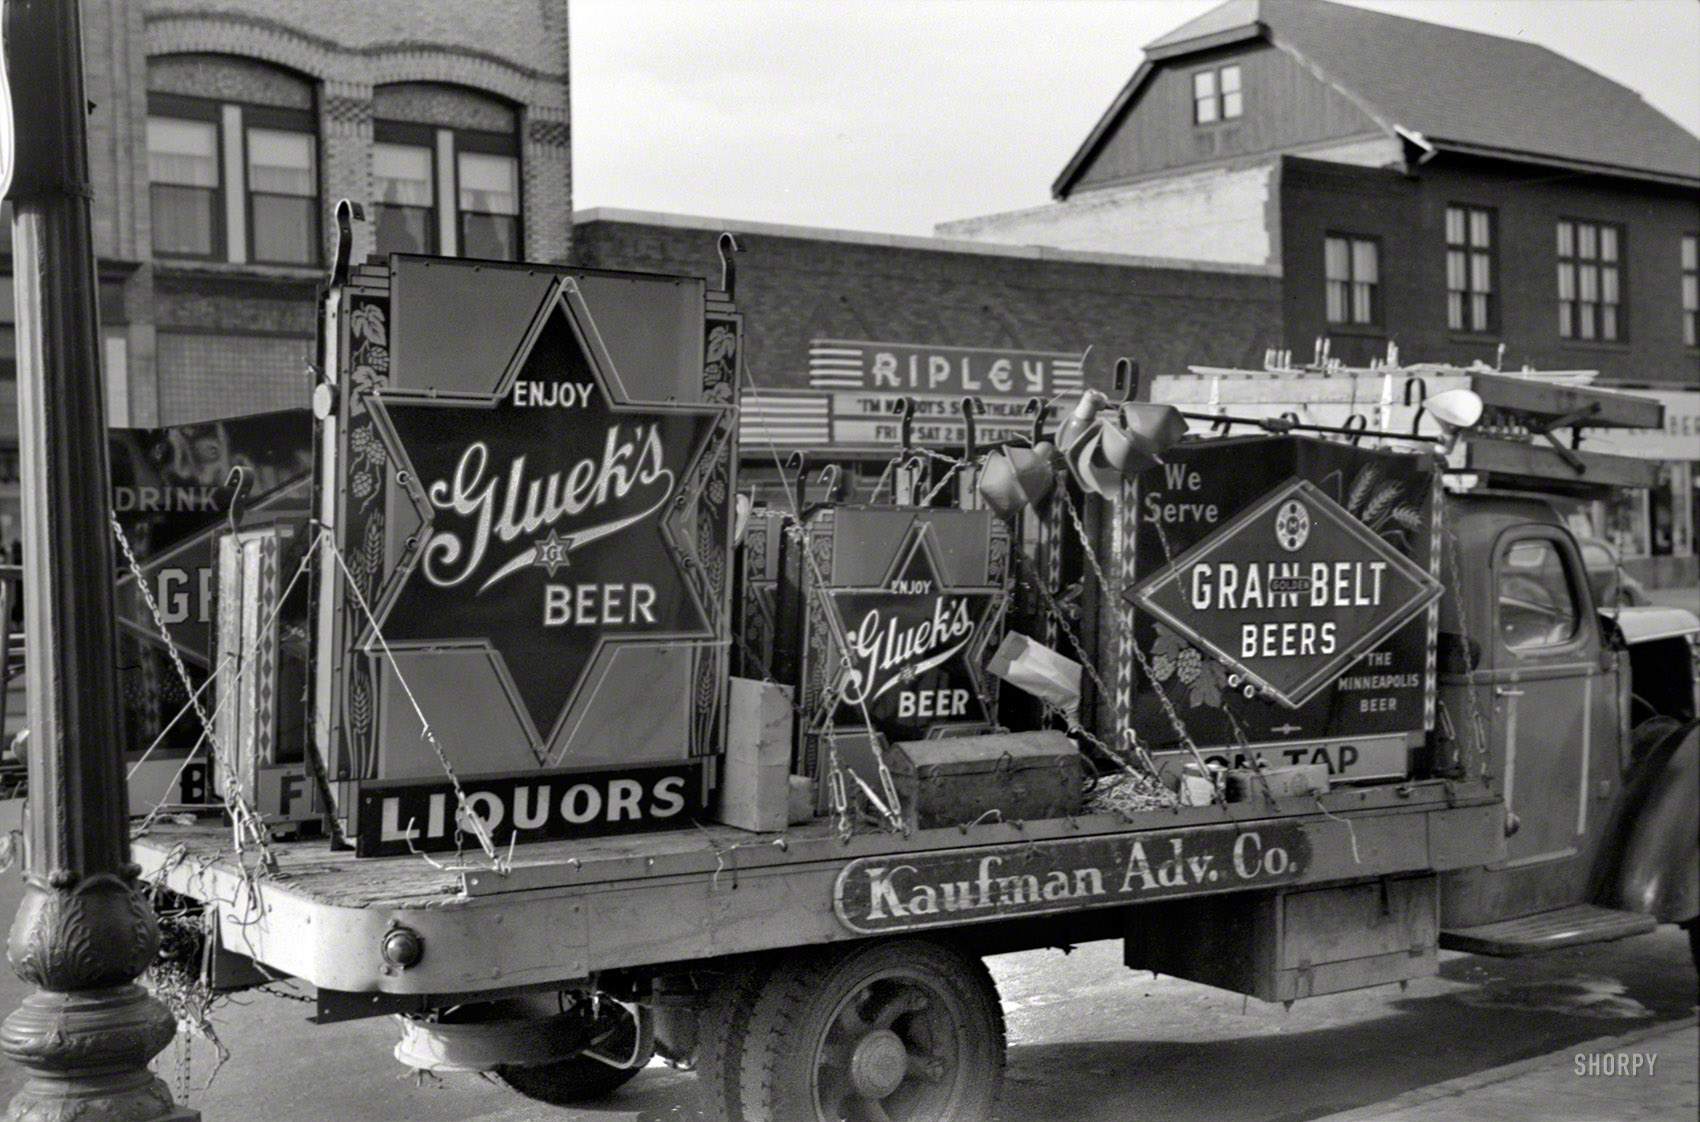 October 1940. "Beer signs on truck. Little Falls, Minnesota." Gluek's and Grain Belt on tap. 35mm nitrate negative by John Vachon. View full size.